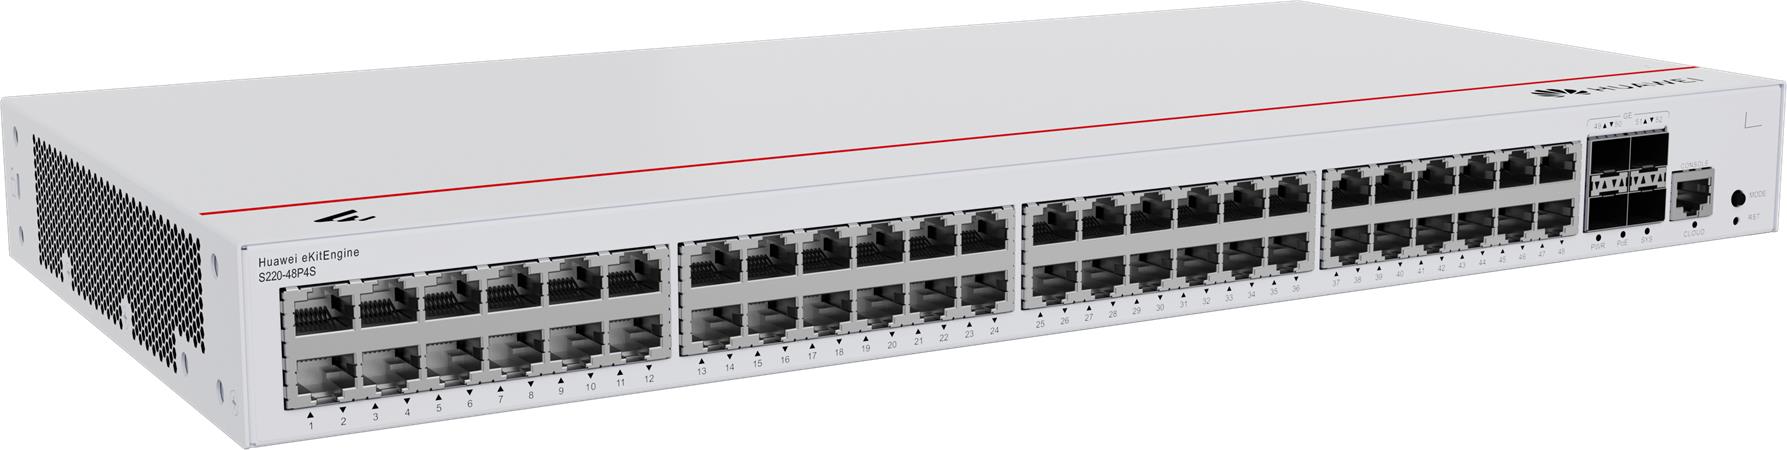 Huawei S220-48P4S Switch (48*GE ports(380W PoE+), 4*GE SFP ports, built-in AC po